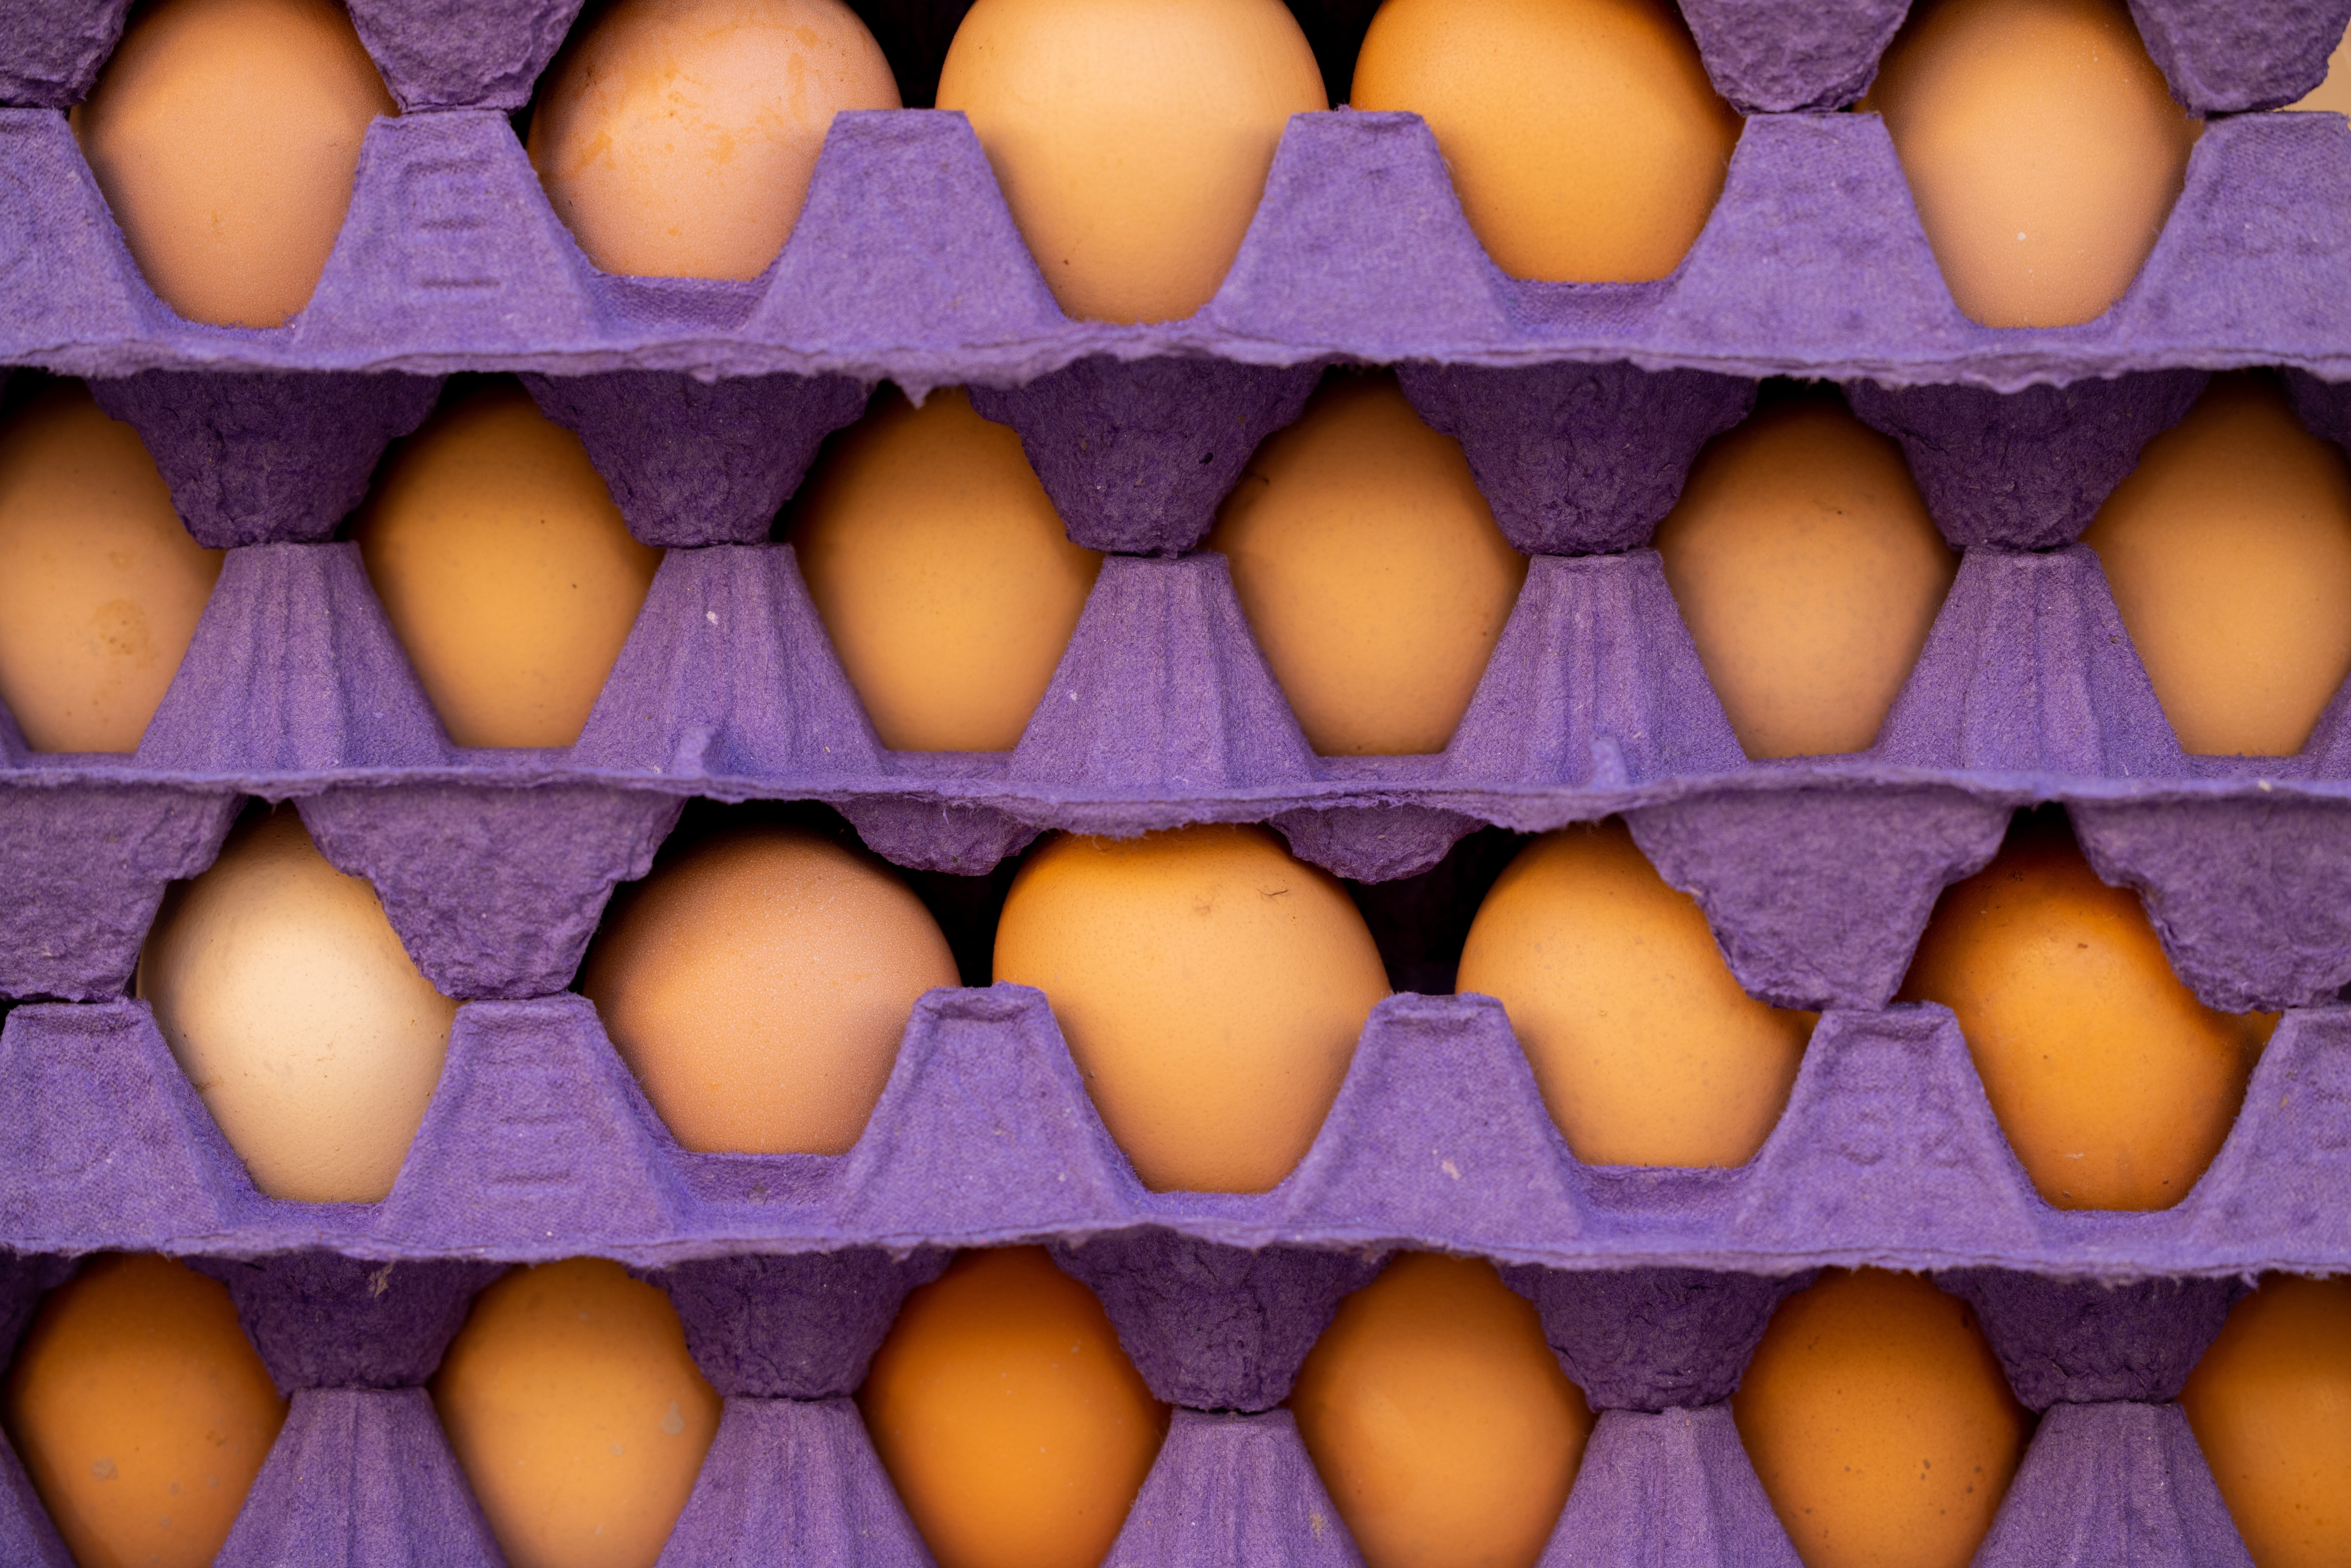 A stack of cardboard trays containing eggs